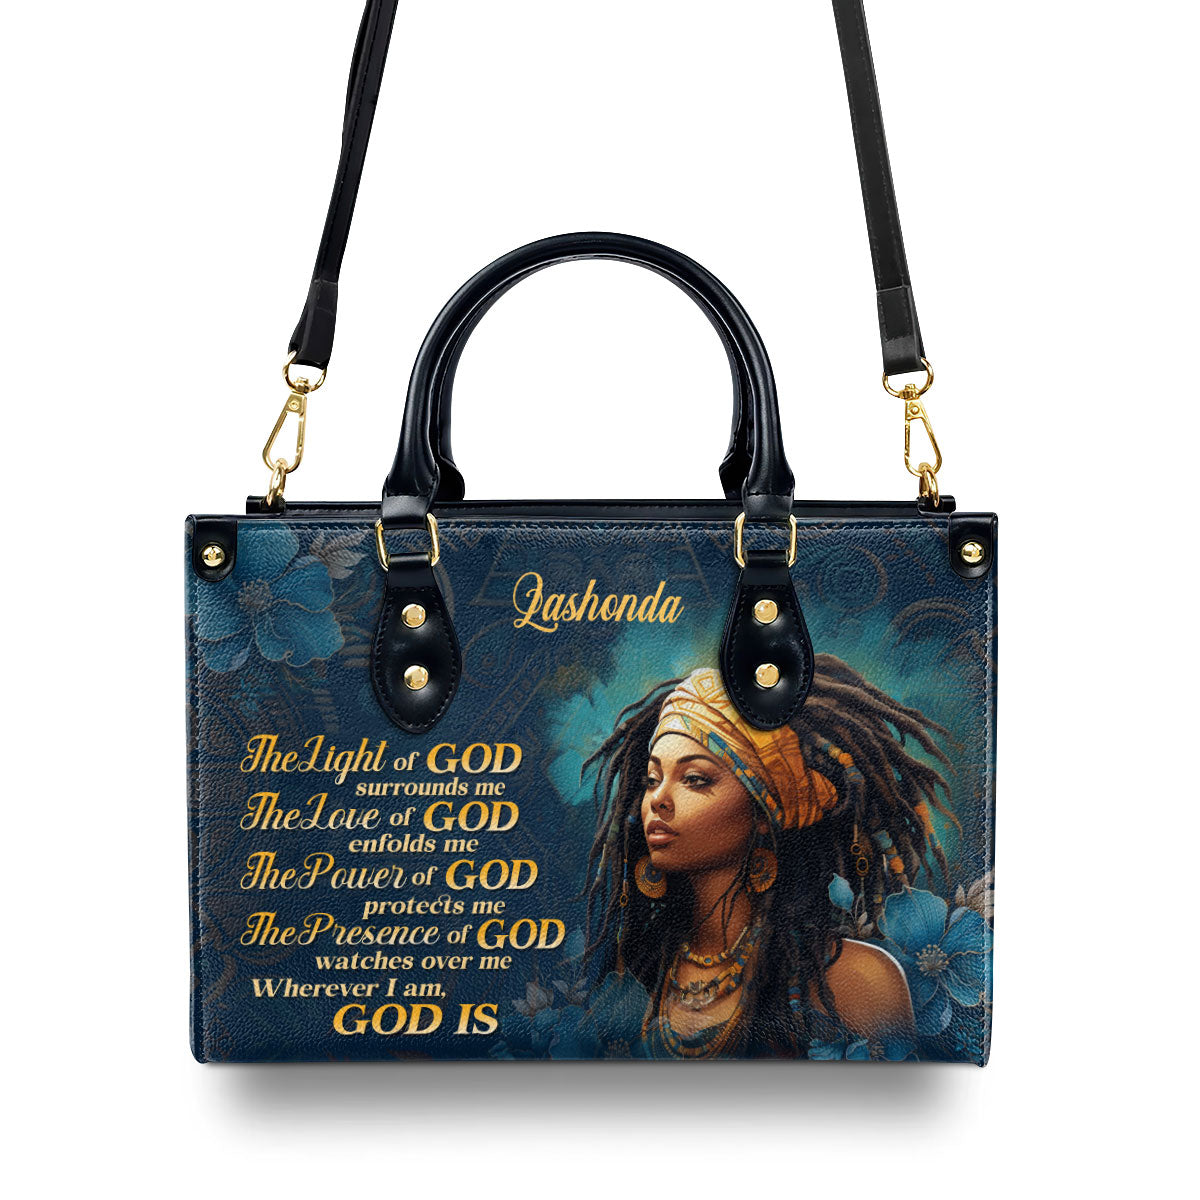 The Light Of God Surrounds Me - Personalized Purple Leather Handbag STB173